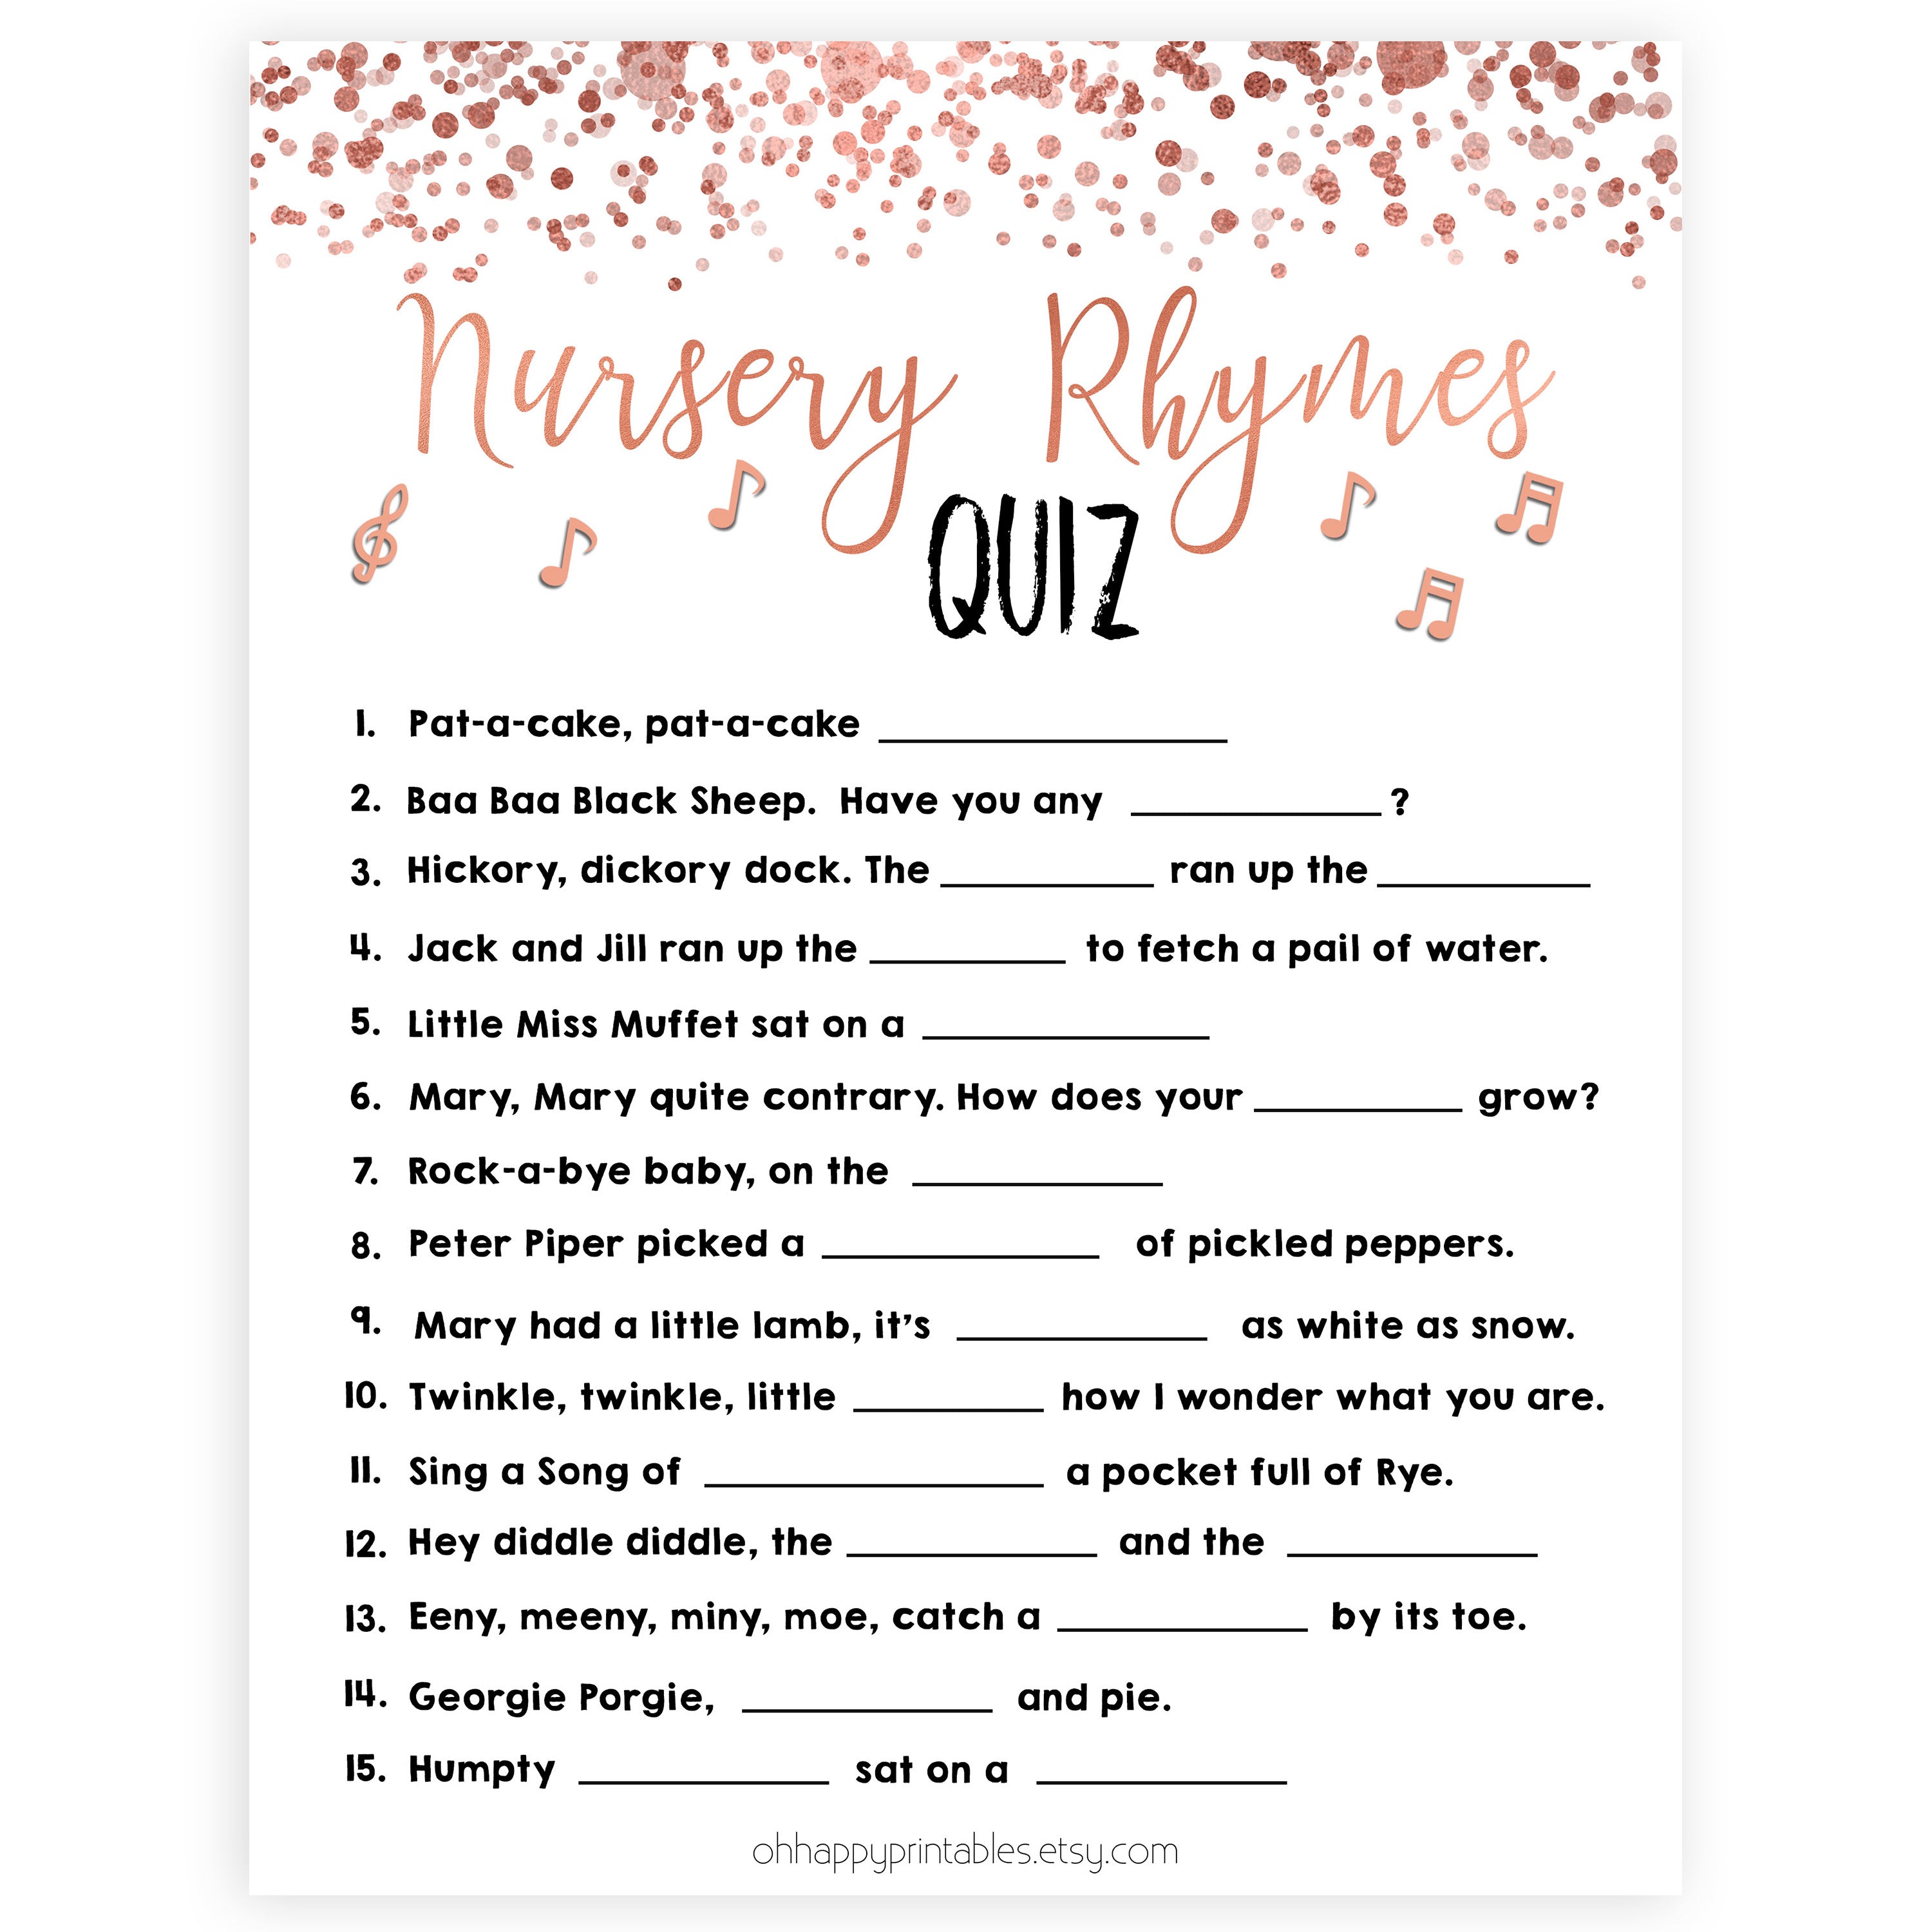 Rose Gold Nursery Rhyme Quiz, Nursery Rhyme Game, Baby Shower Games, Baby Rhyme Game, Guess the Nursery Rhyme, Rose Gold Baby Shower Games, printable baby shower games, fun baby shower games, popular baby shower games